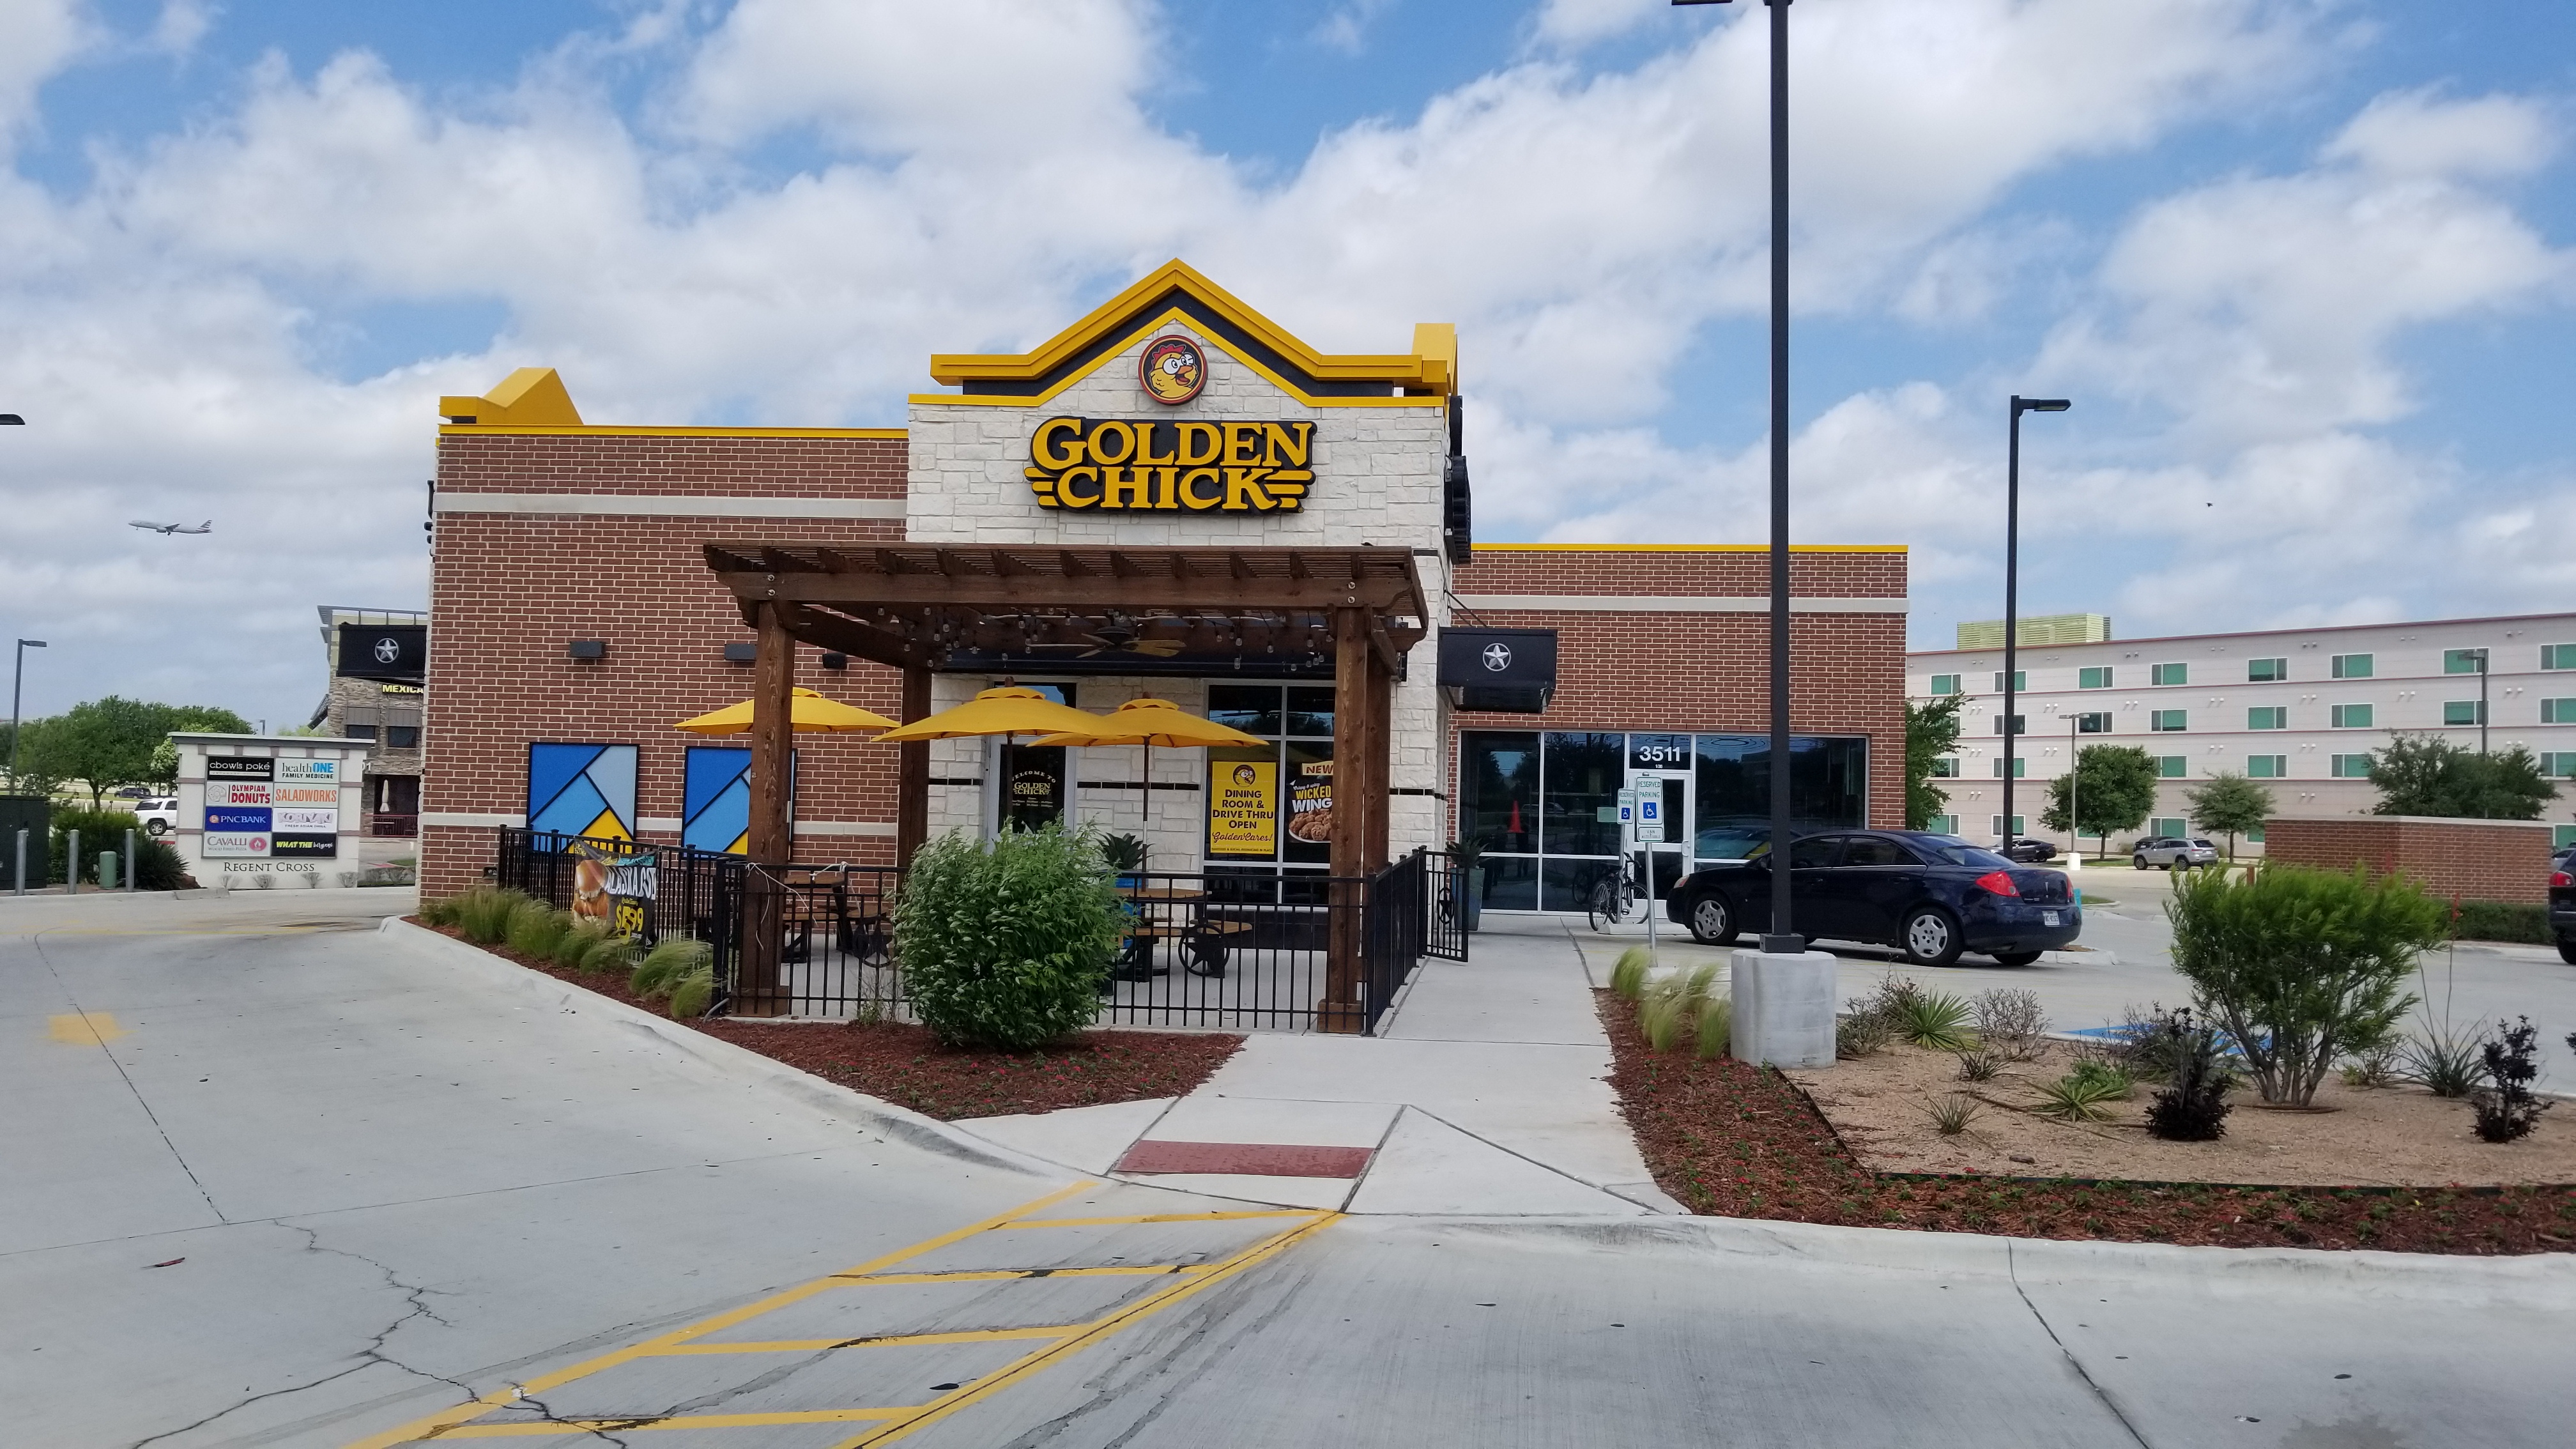 Golden Chick storefront.  Your local Golden Chick fast food restaurant in Irving, Texas